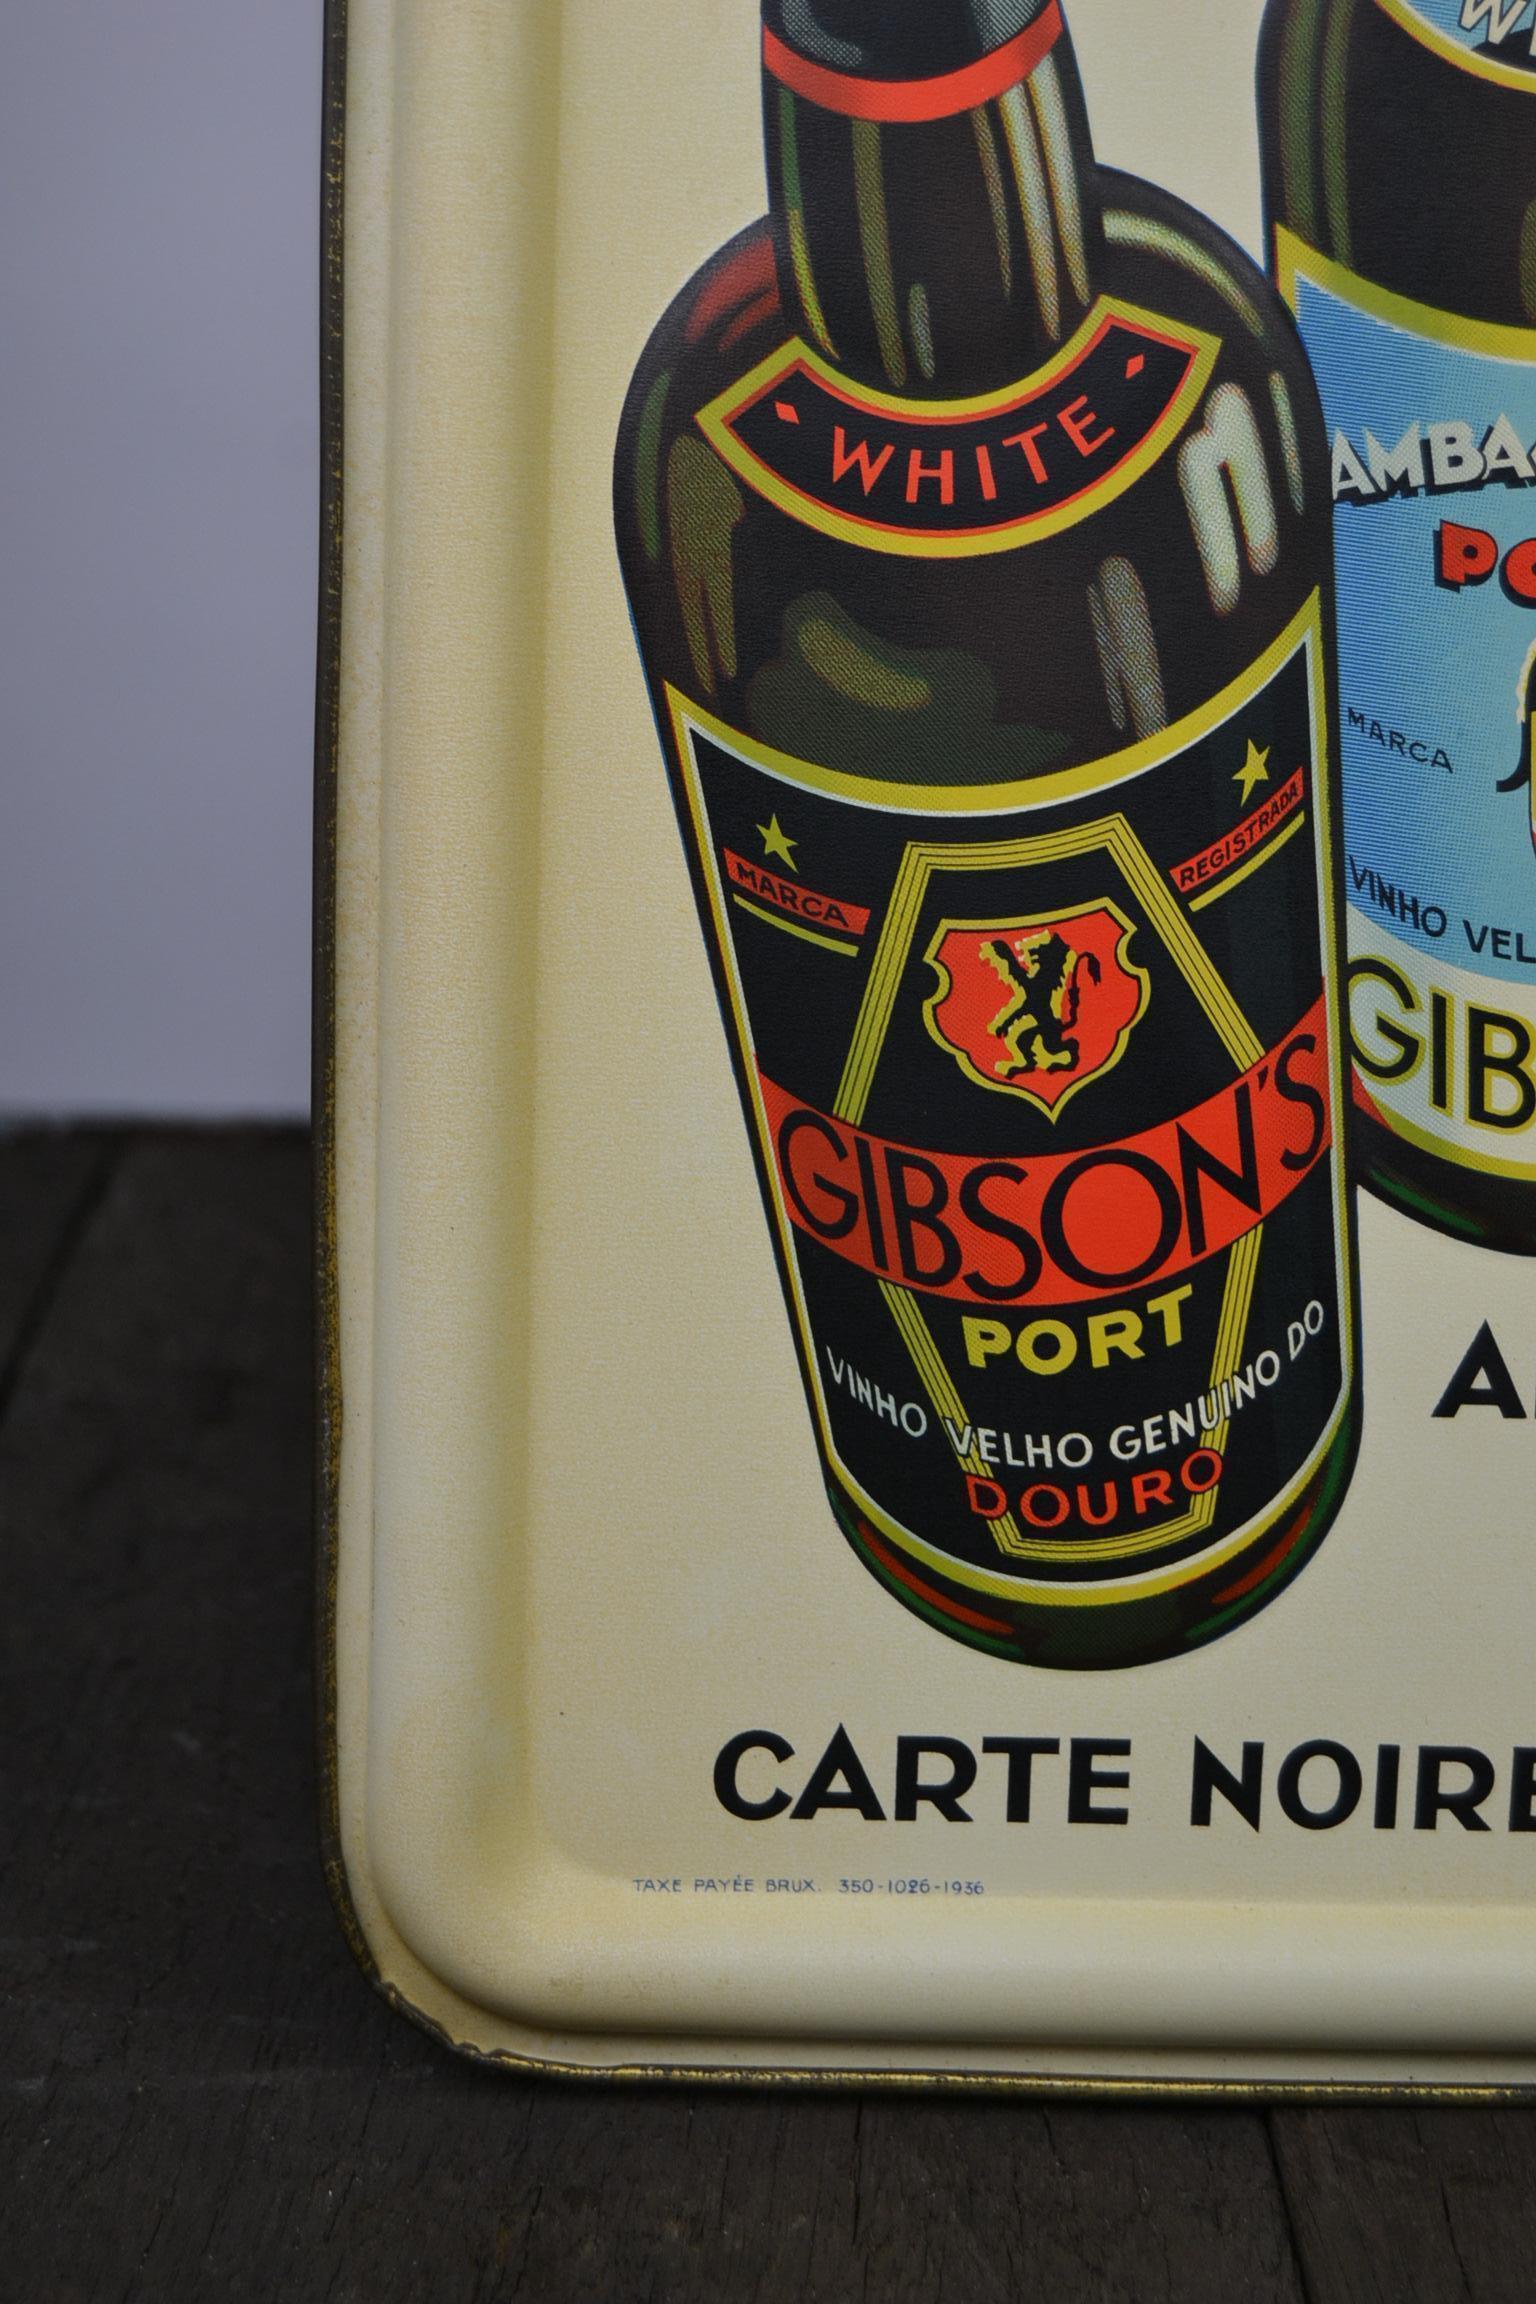 1936 Tin Sign for Les Portos Gibson, Appetizer Drink 6